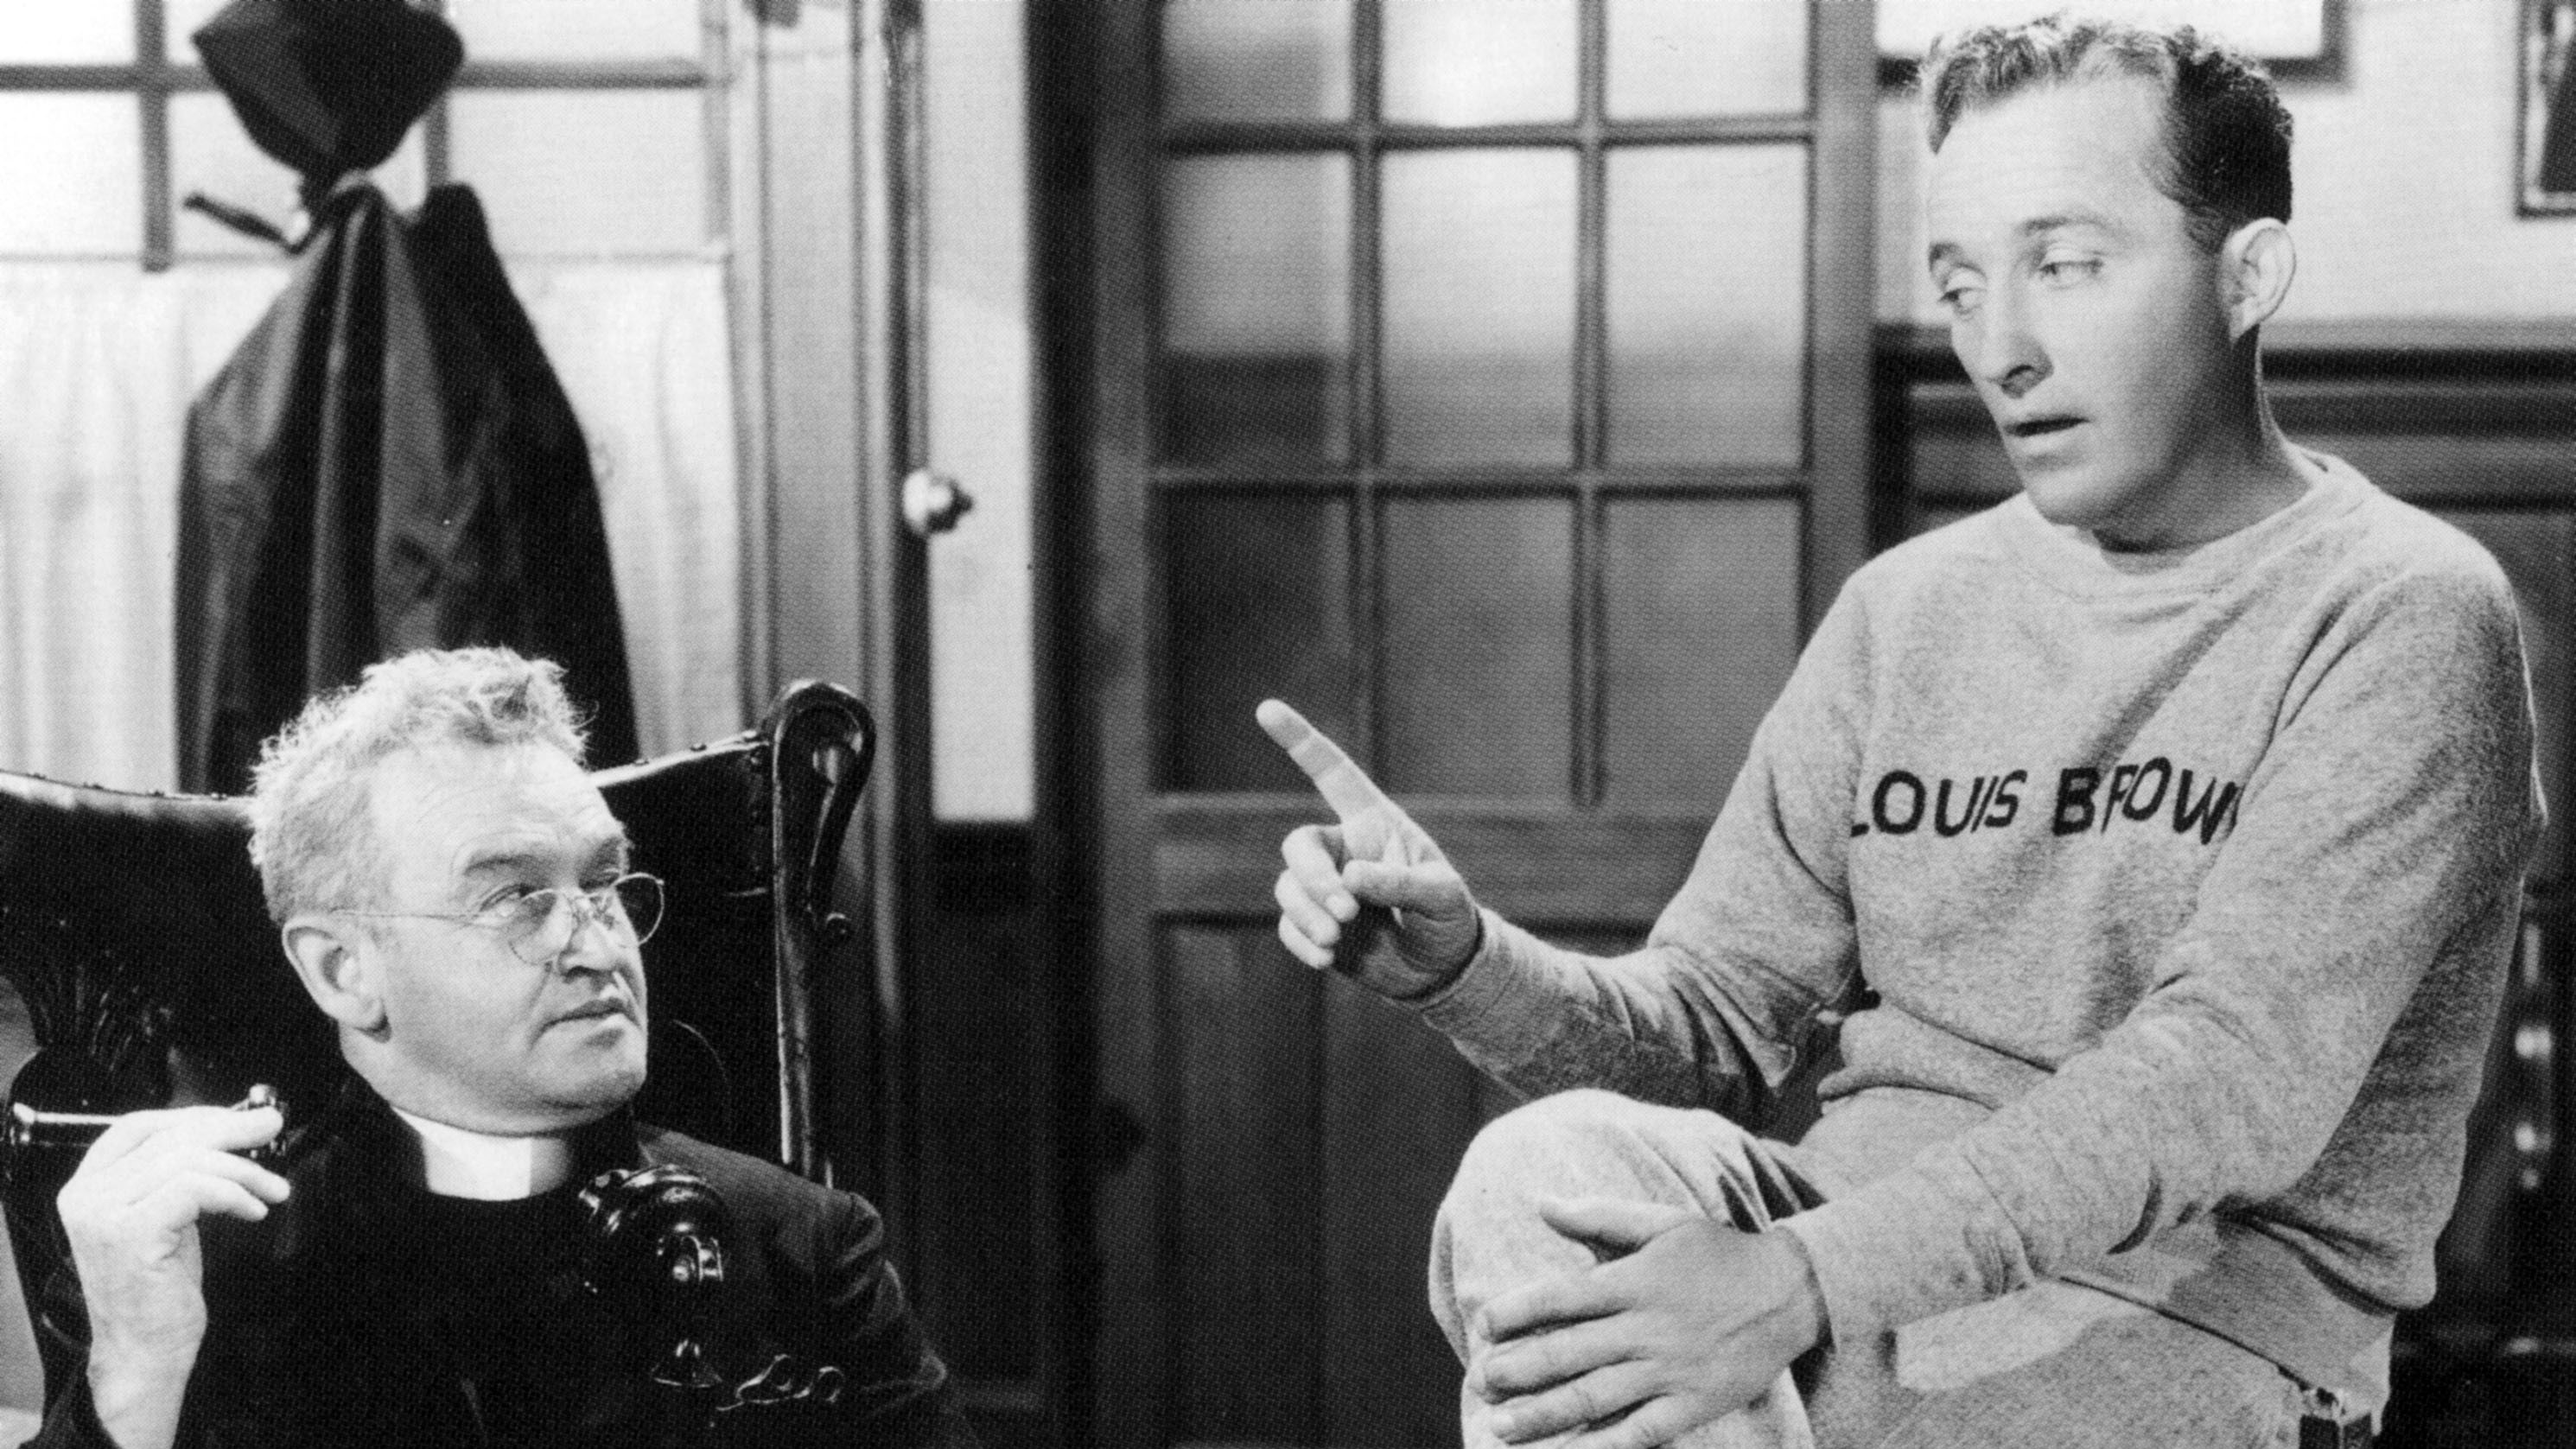 Barry Fitzgerald and Bing Crosby in Going My Way